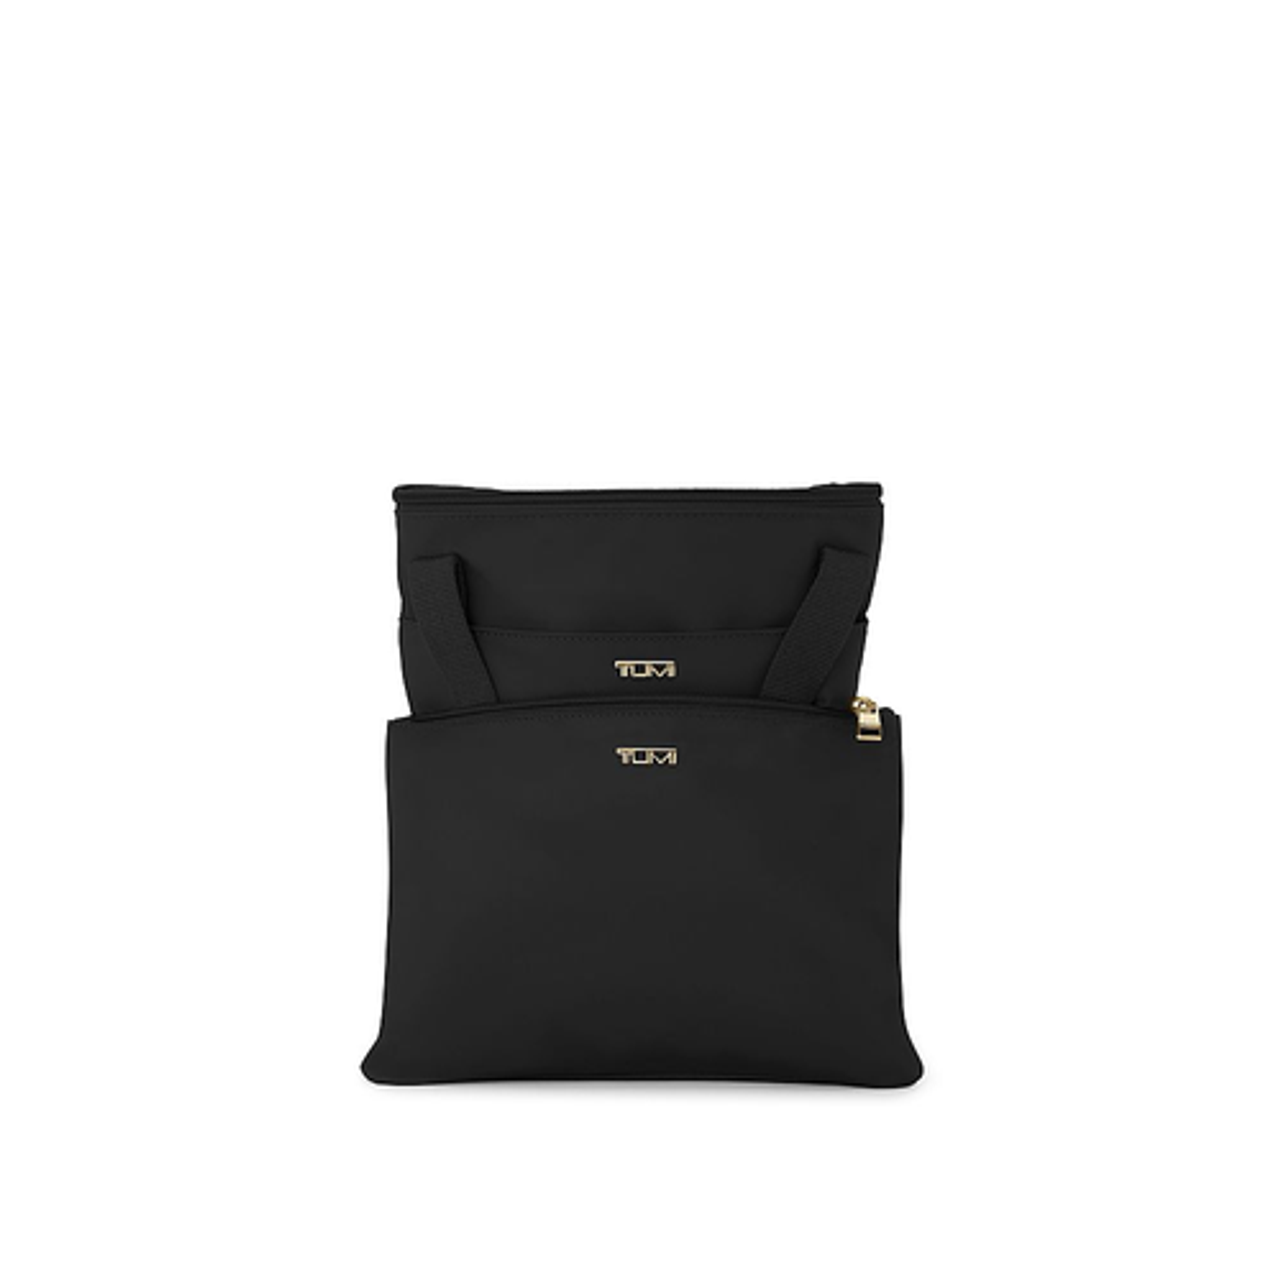 TUMI - Voyageur Just in Case Tote - Black/Gold